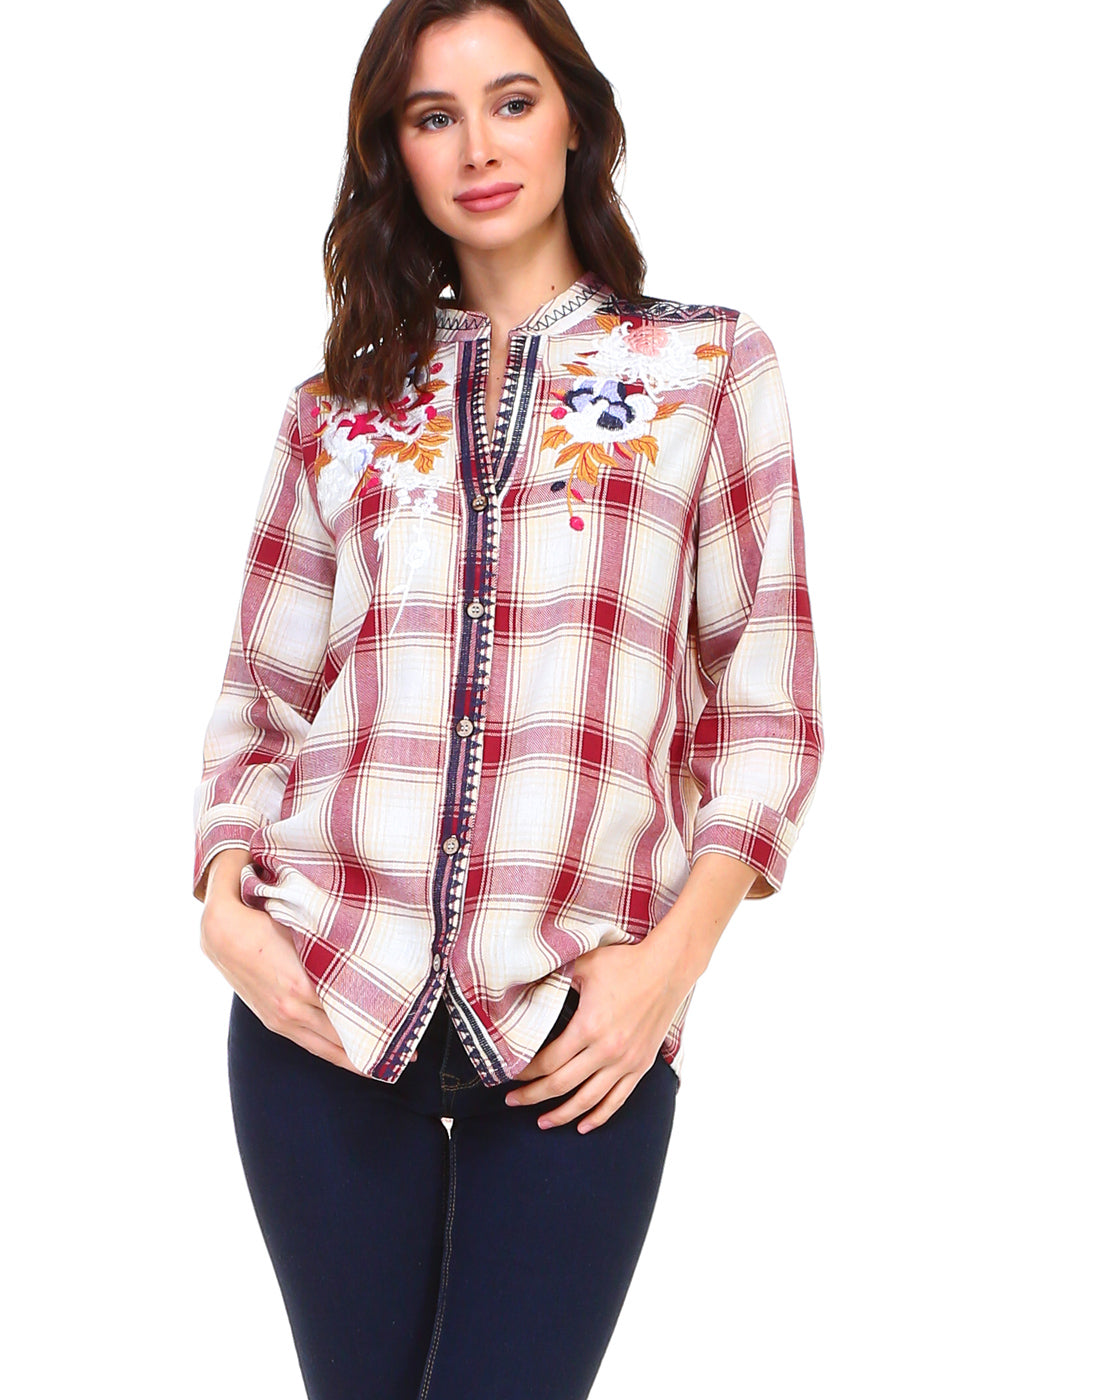 Penelope Cotton Plaid Top with Embroidery